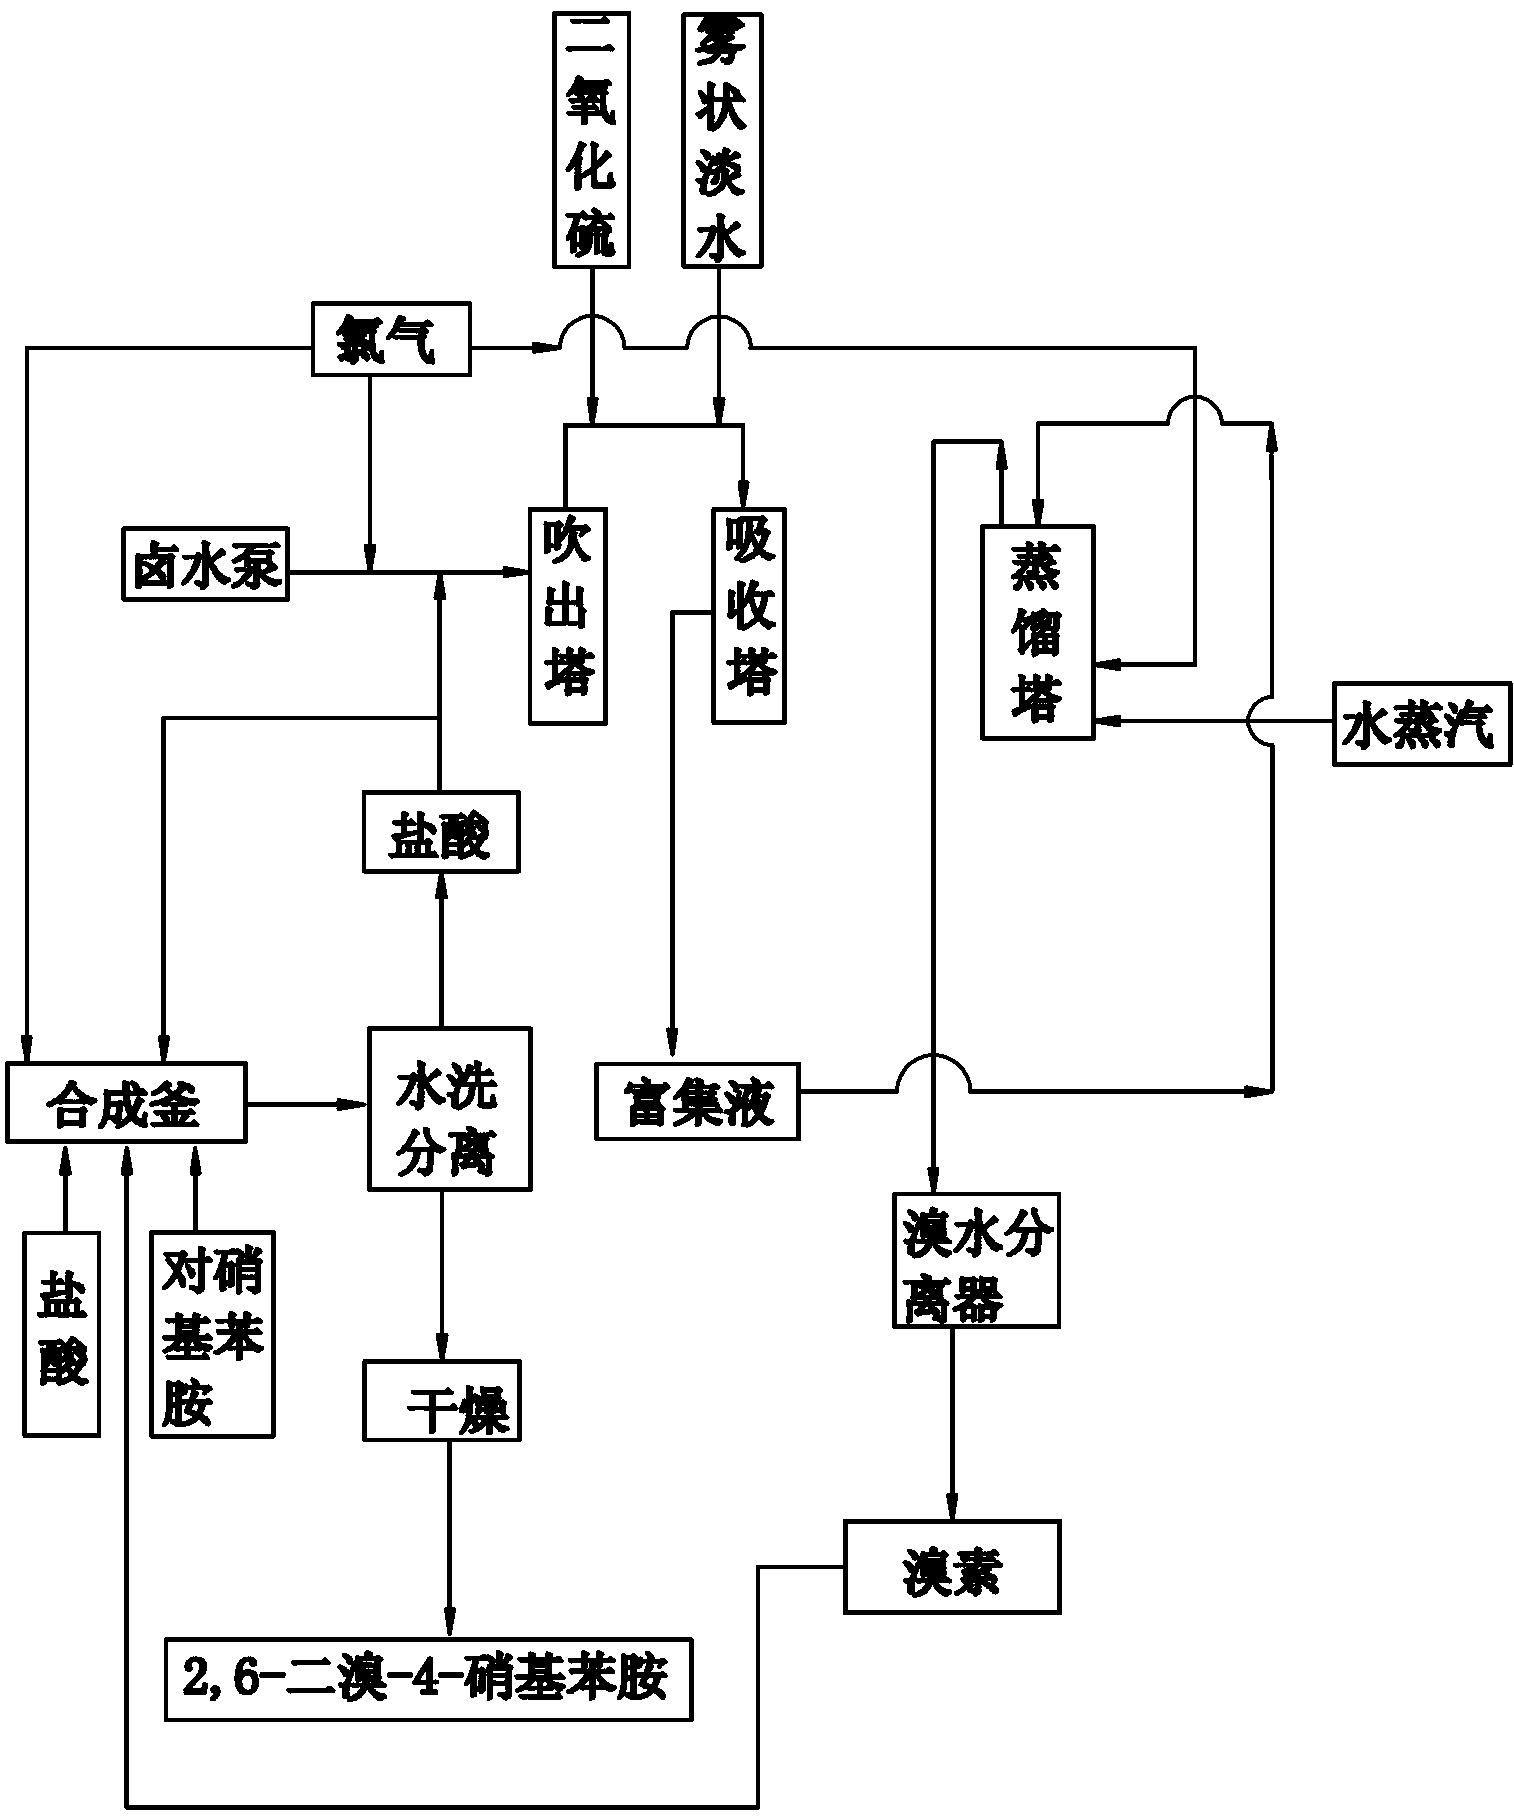 Co-production method and device for 2, 6-dibromo-4-nitroaniline and bromine